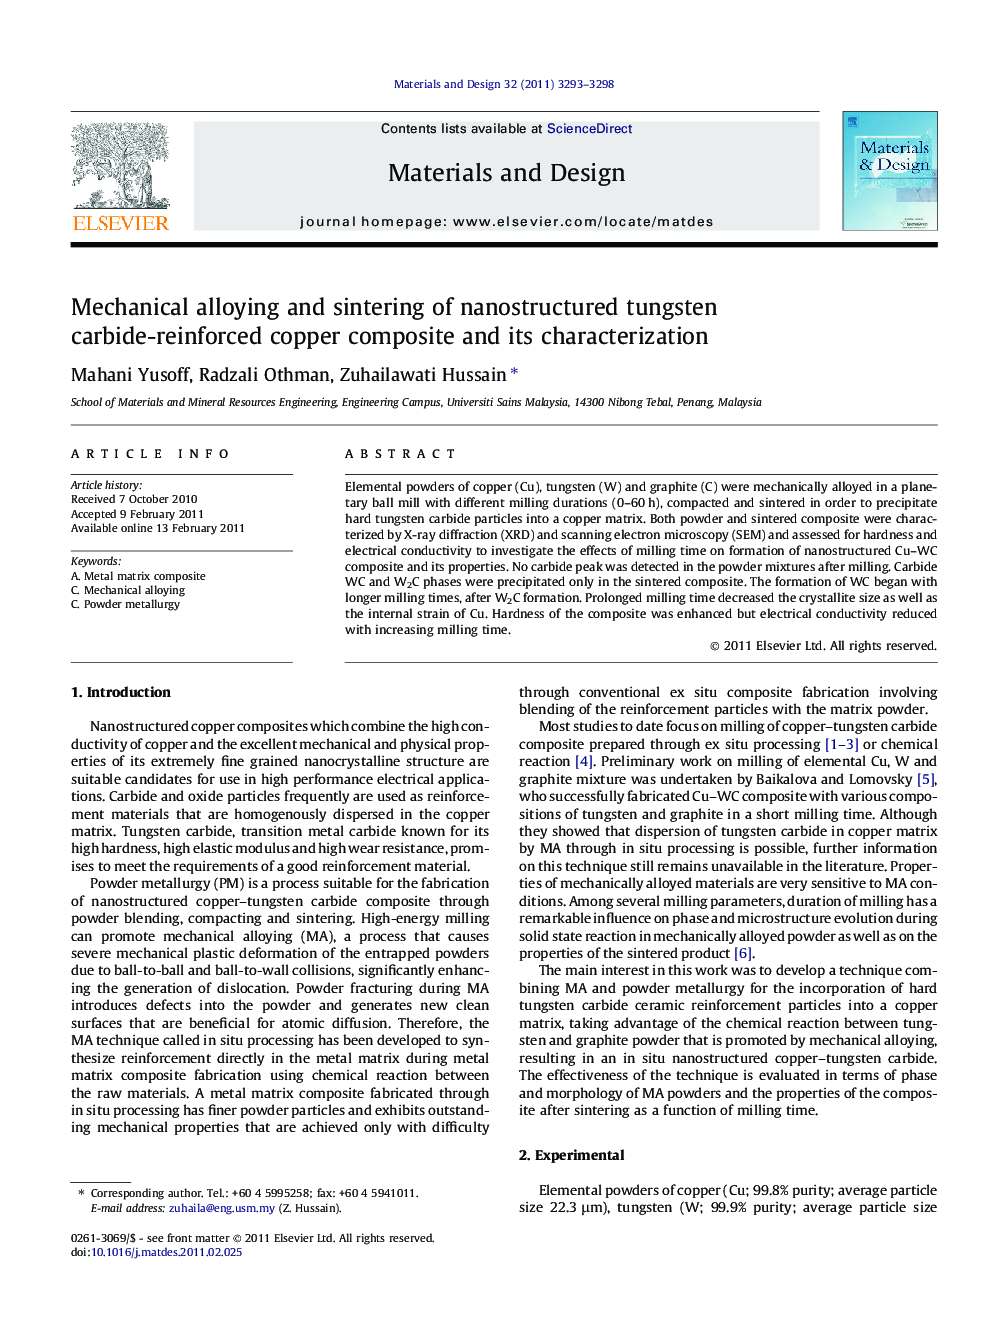 Mechanical alloying and sintering of nanostructured tungsten carbide-reinforced copper composite and its characterization